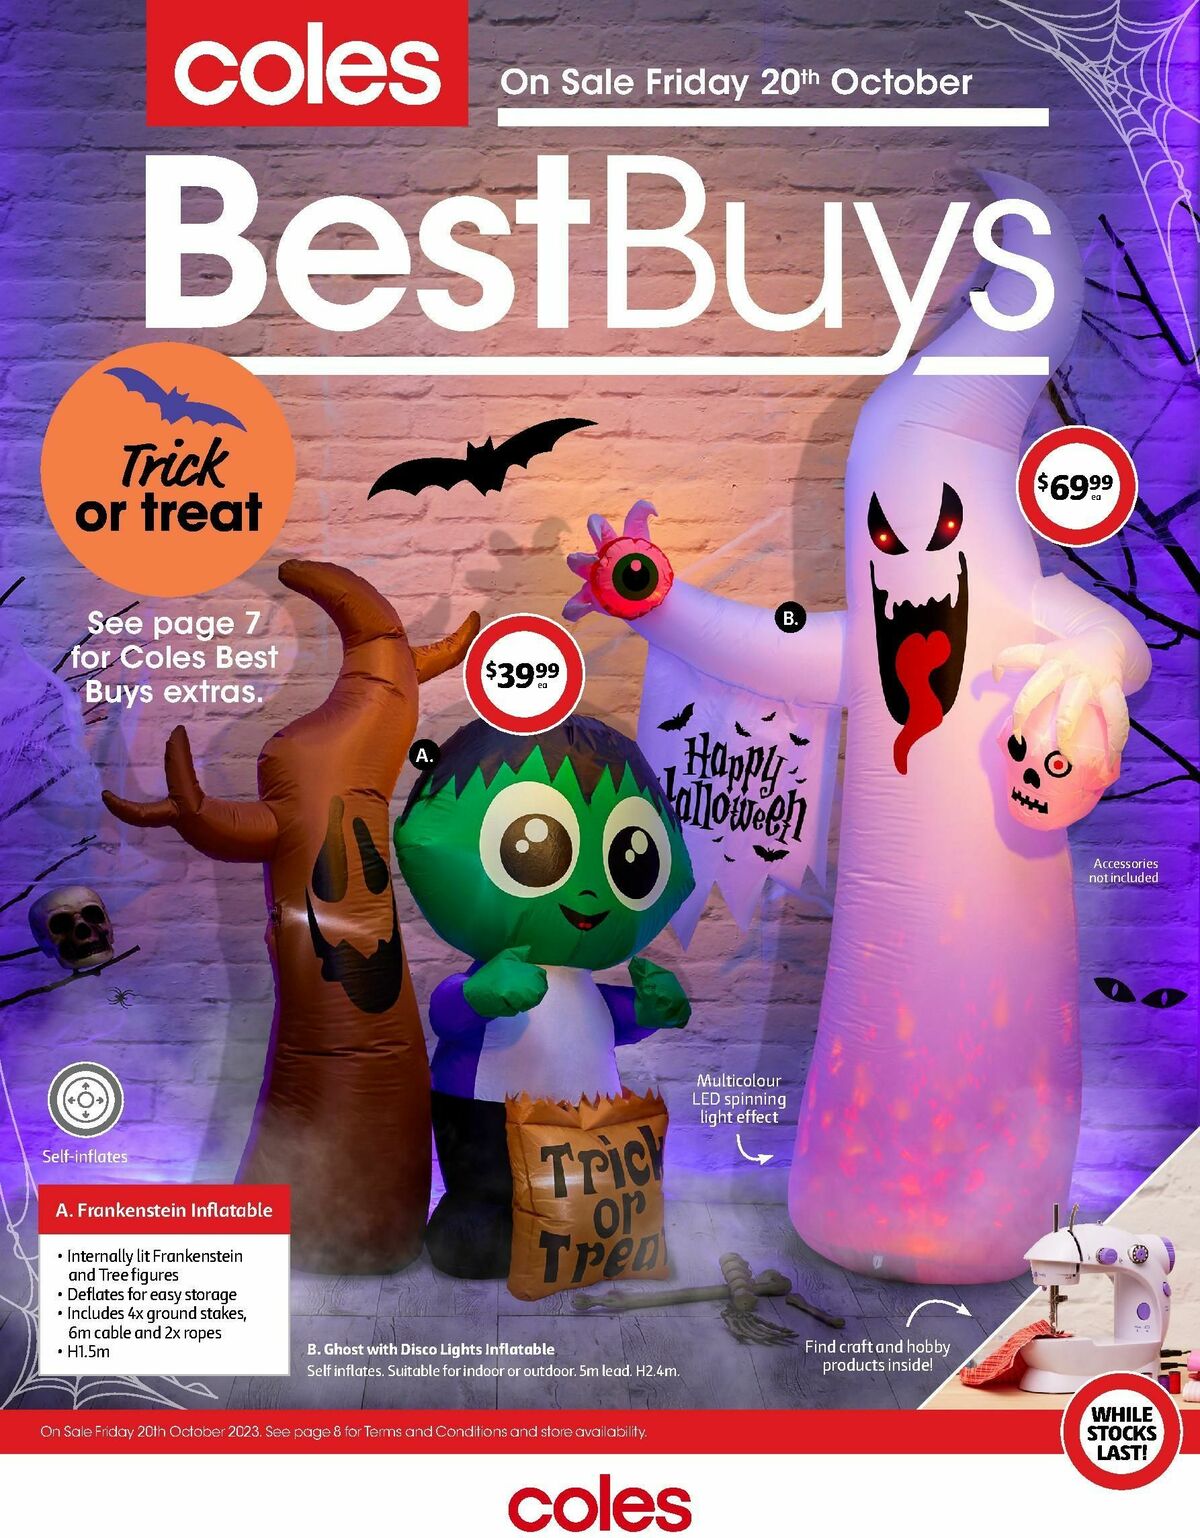 Coles Best Buys - Trick or Treat sneak peek Catalogues from 20 October